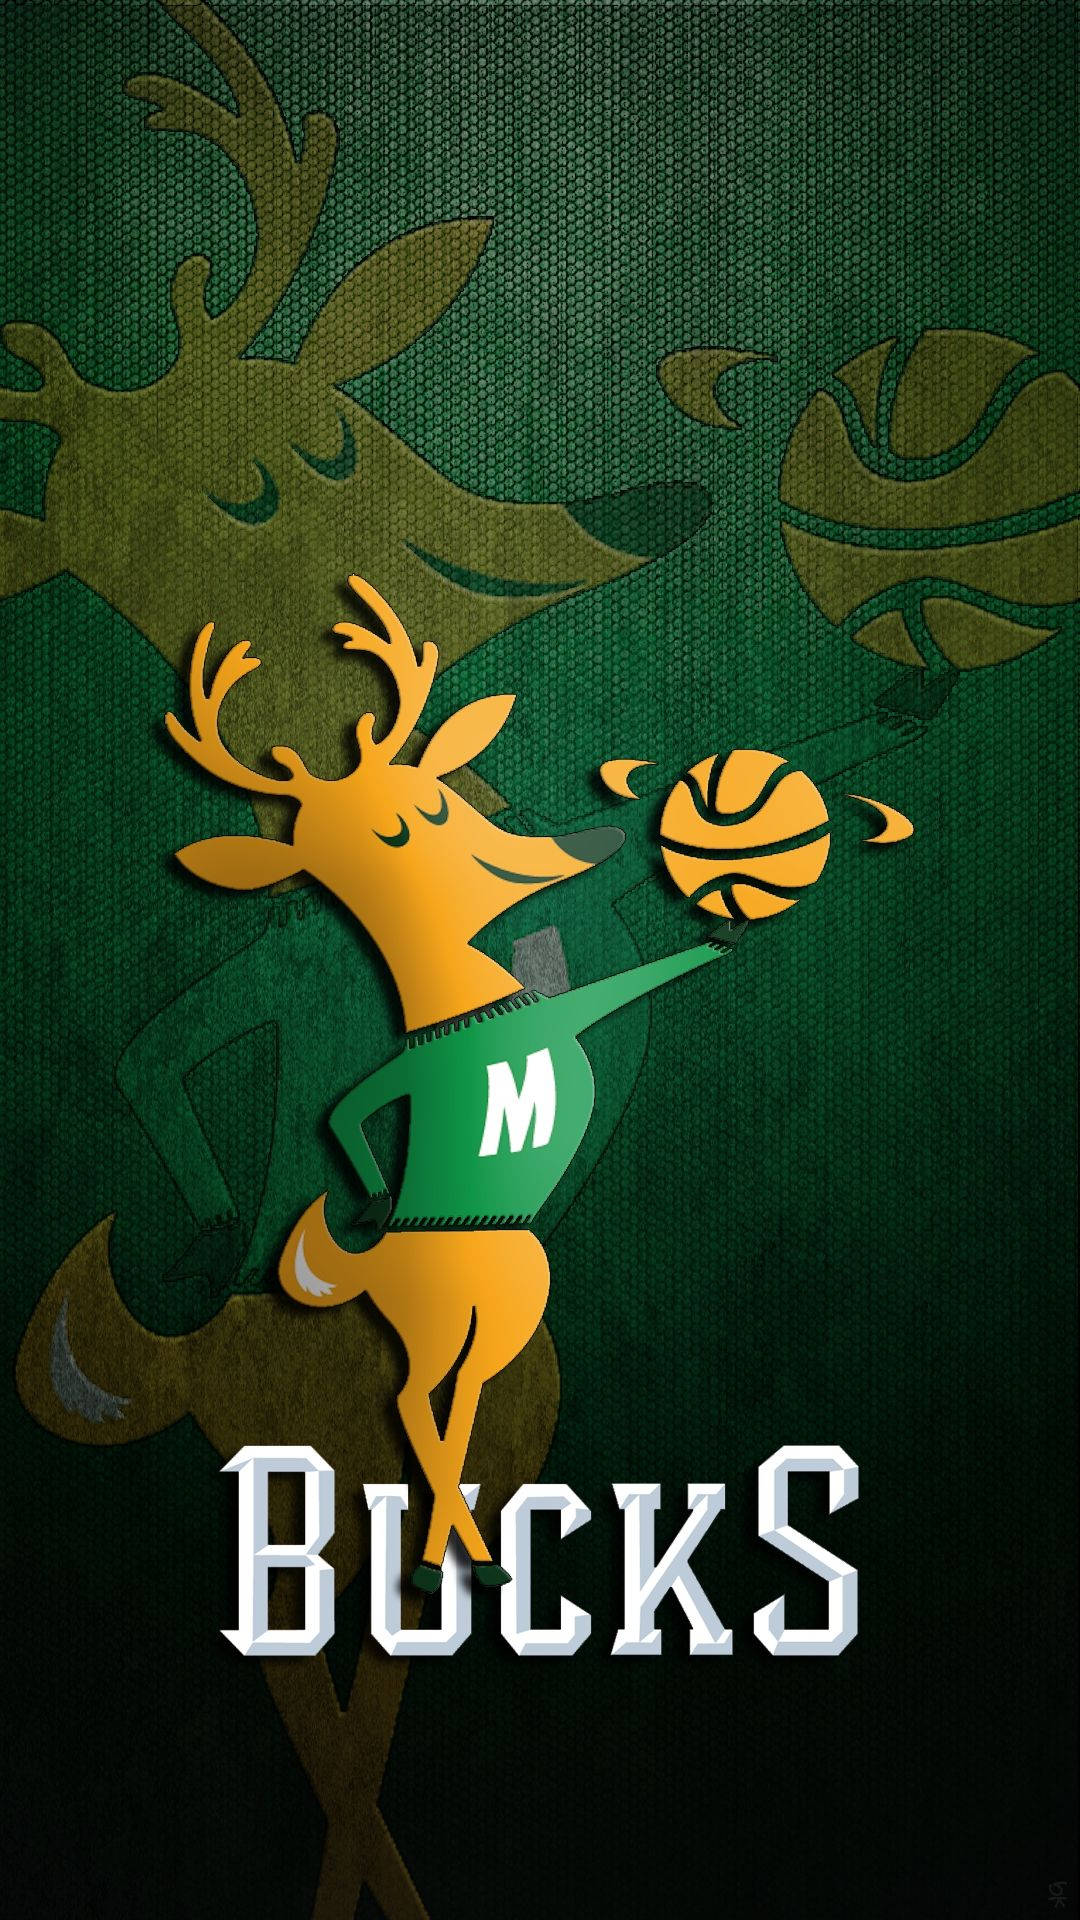 Two versions of a wallpaper for the Bucks Theyre not too good but I  thought Id share my hard work  rMkeBucks